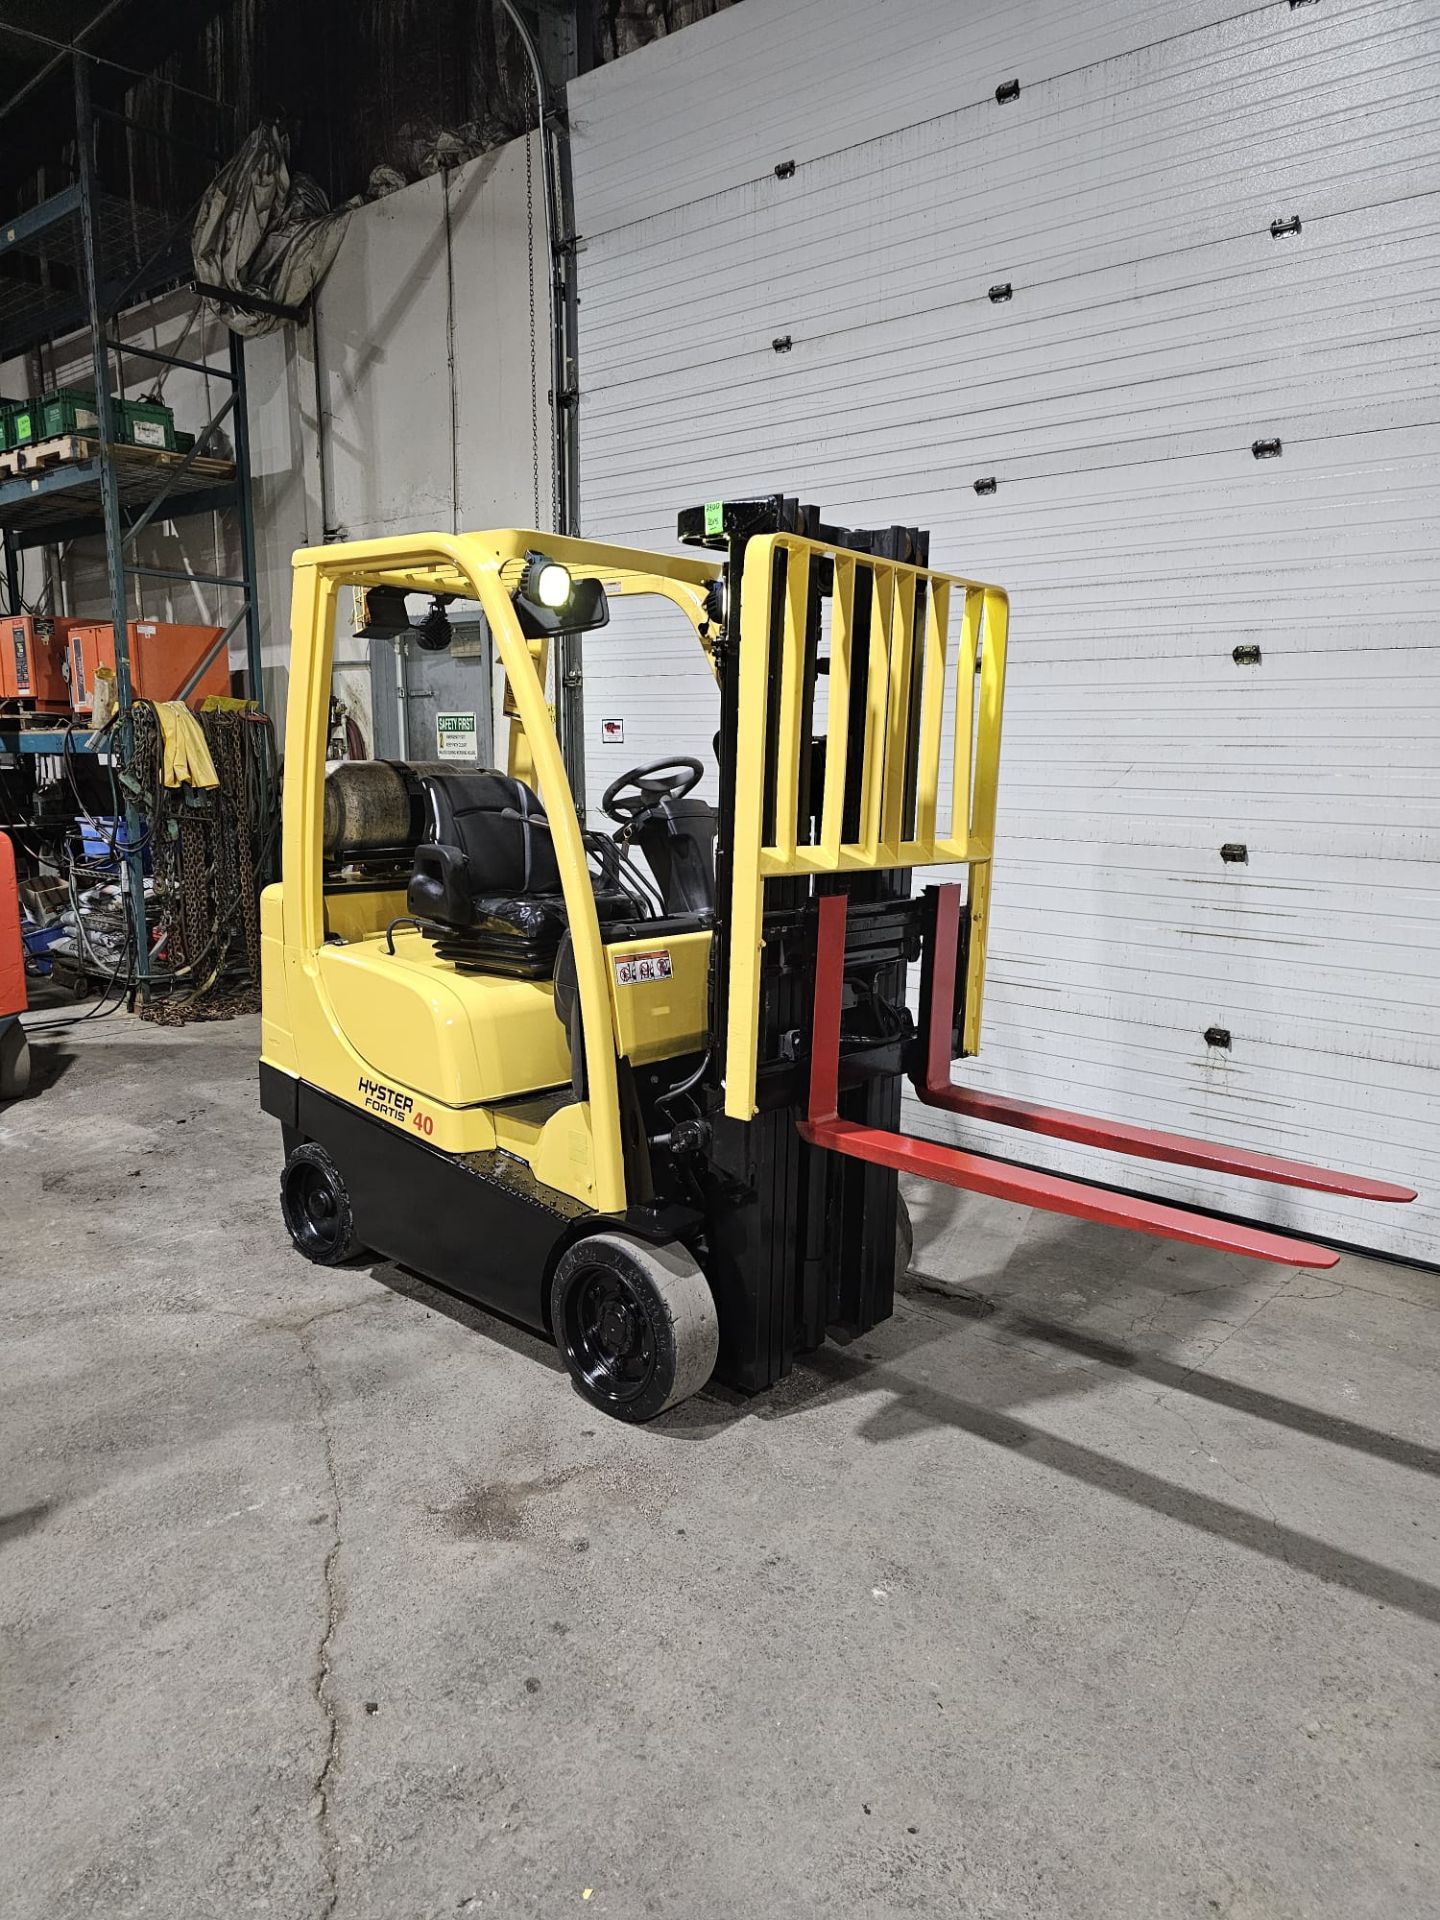 2015 Hyster 4,000lbs Capacity LPG (Propane) Forklift with sideshift and 3-STAGE MAST (no propane - Image 3 of 5